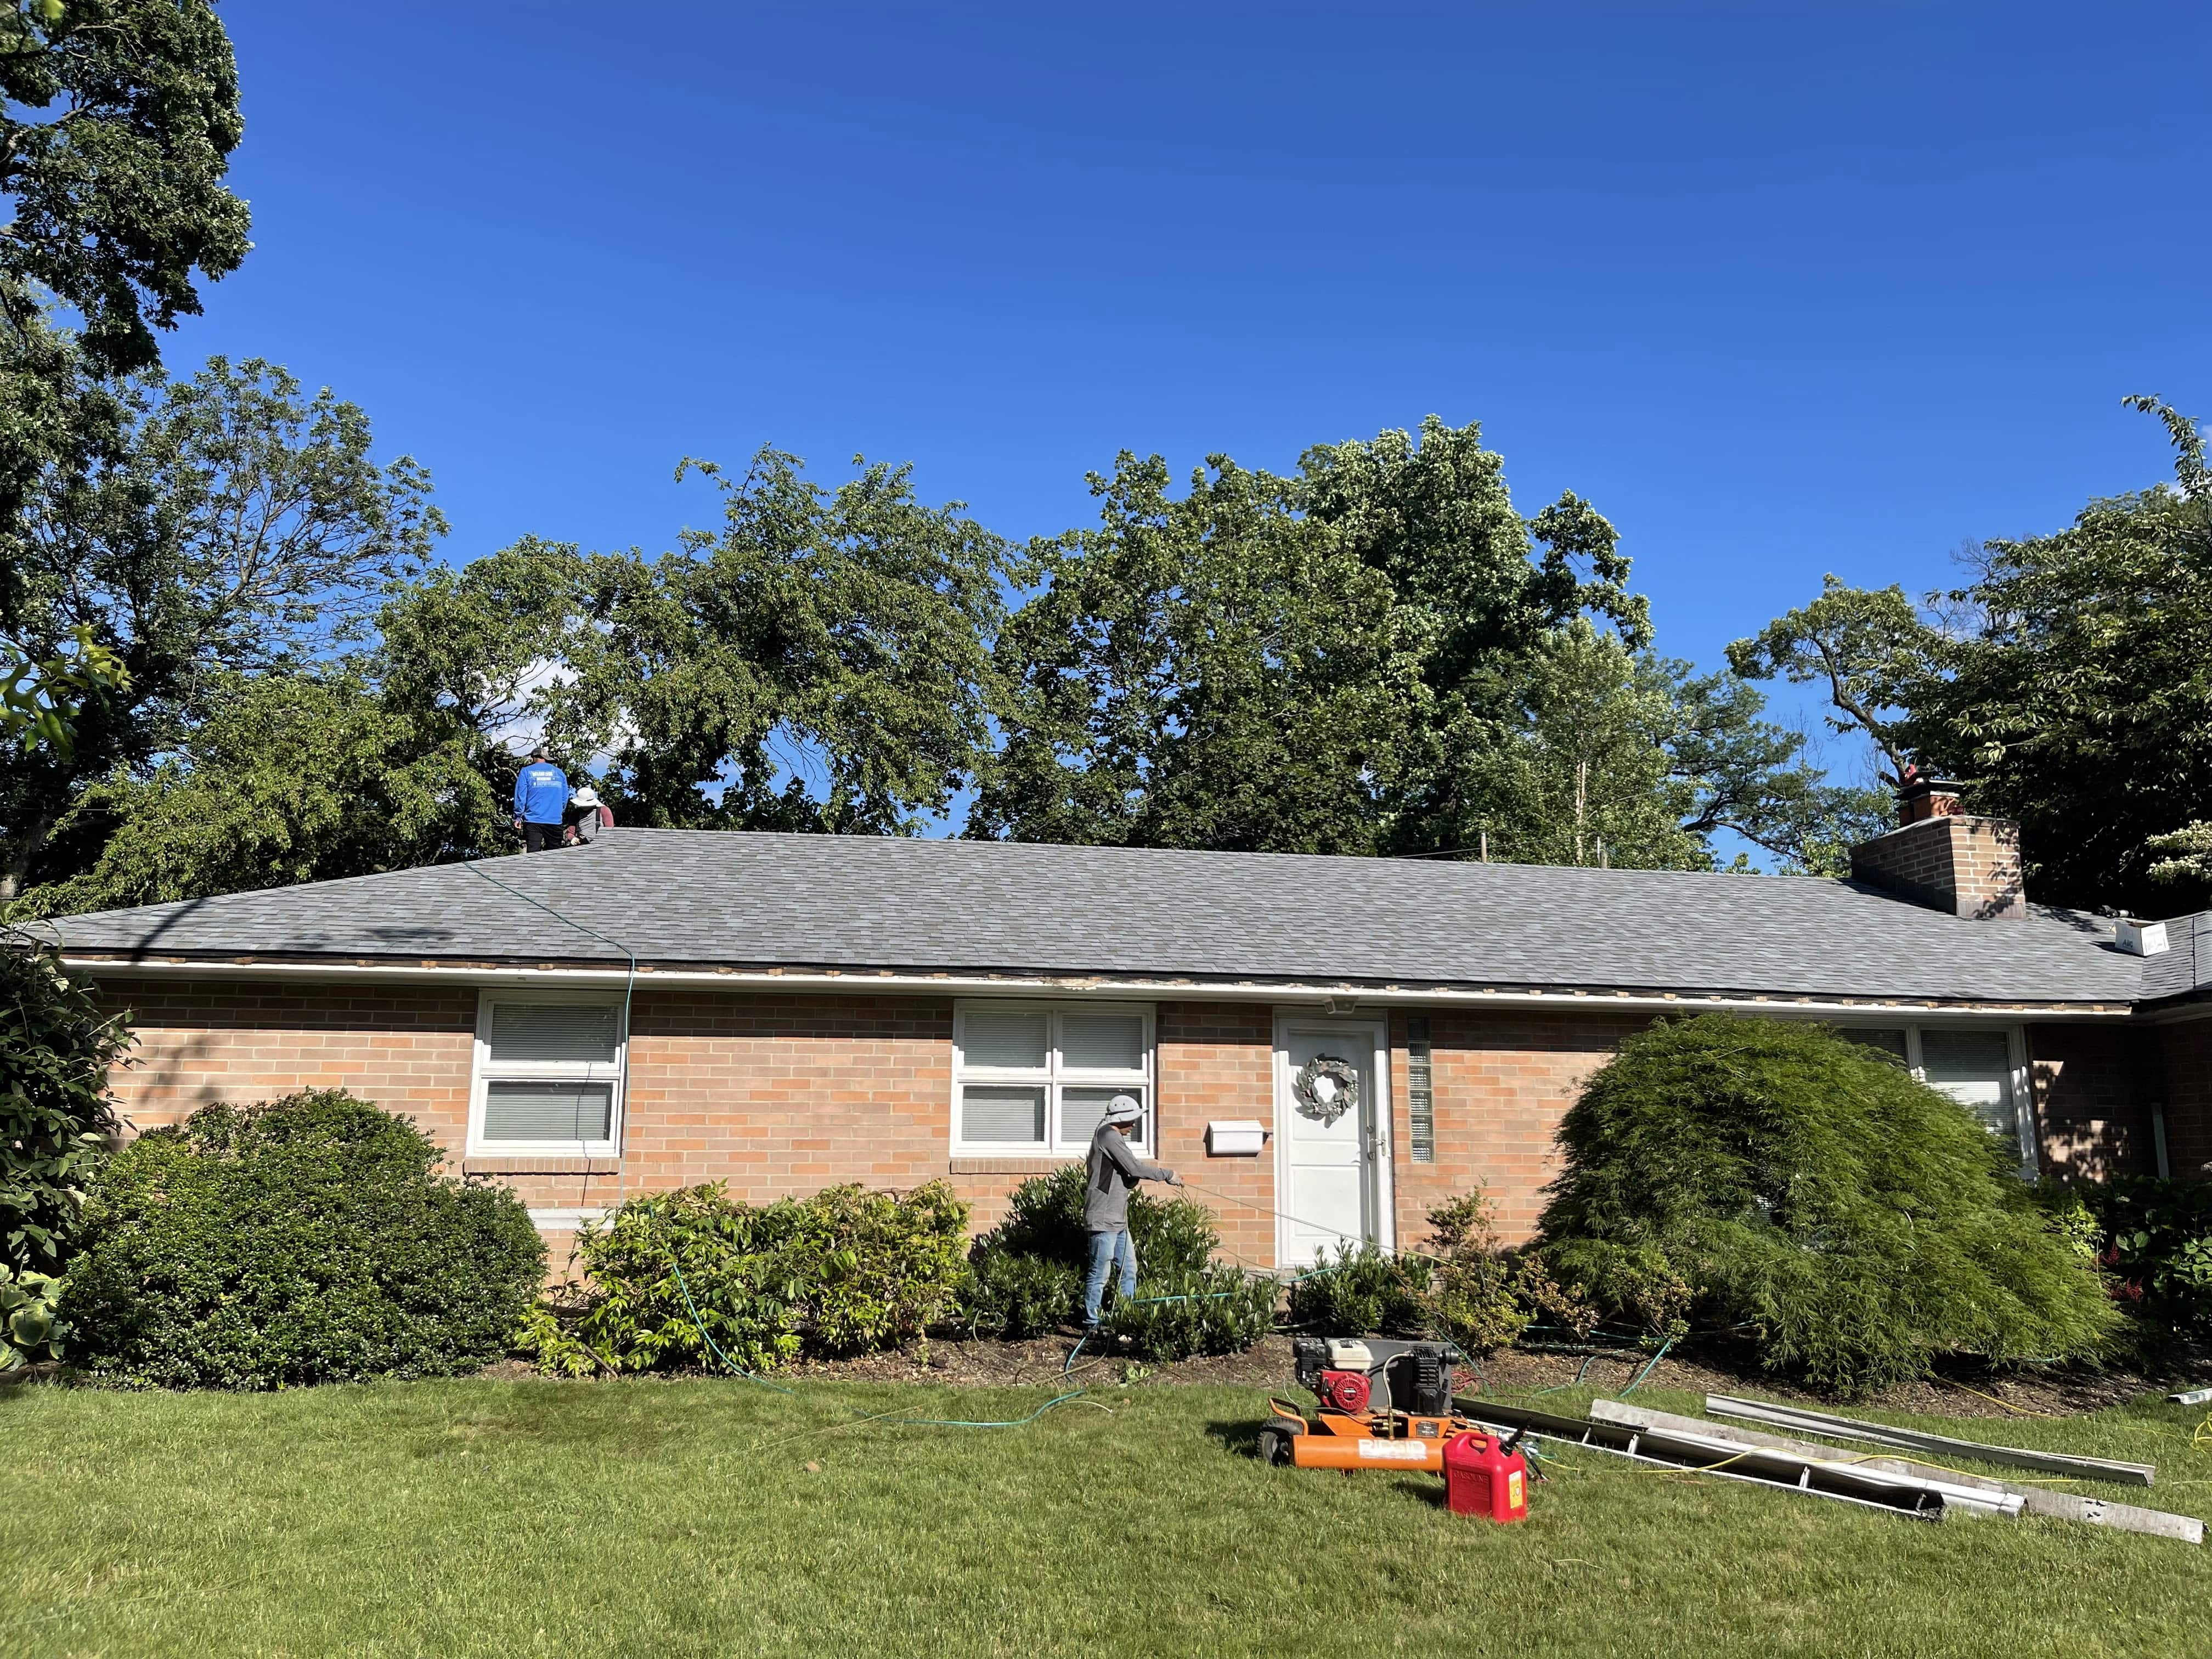 A1 garden state construction - Little Falls, NJ, US, excel roofing